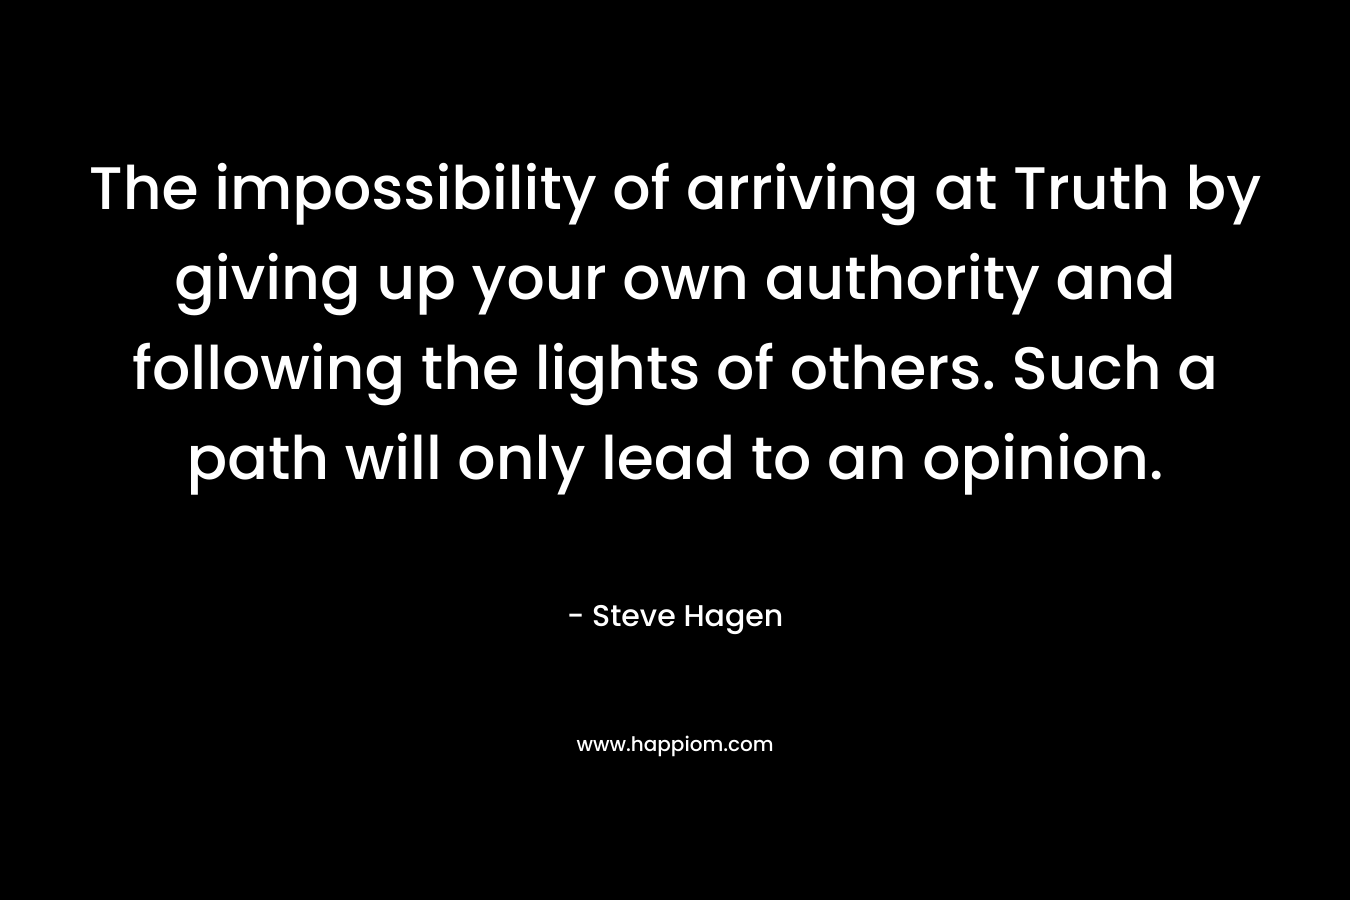 The impossibility of arriving at Truth by giving up your own authority and following the lights of others. Such a path will only lead to an opinion.